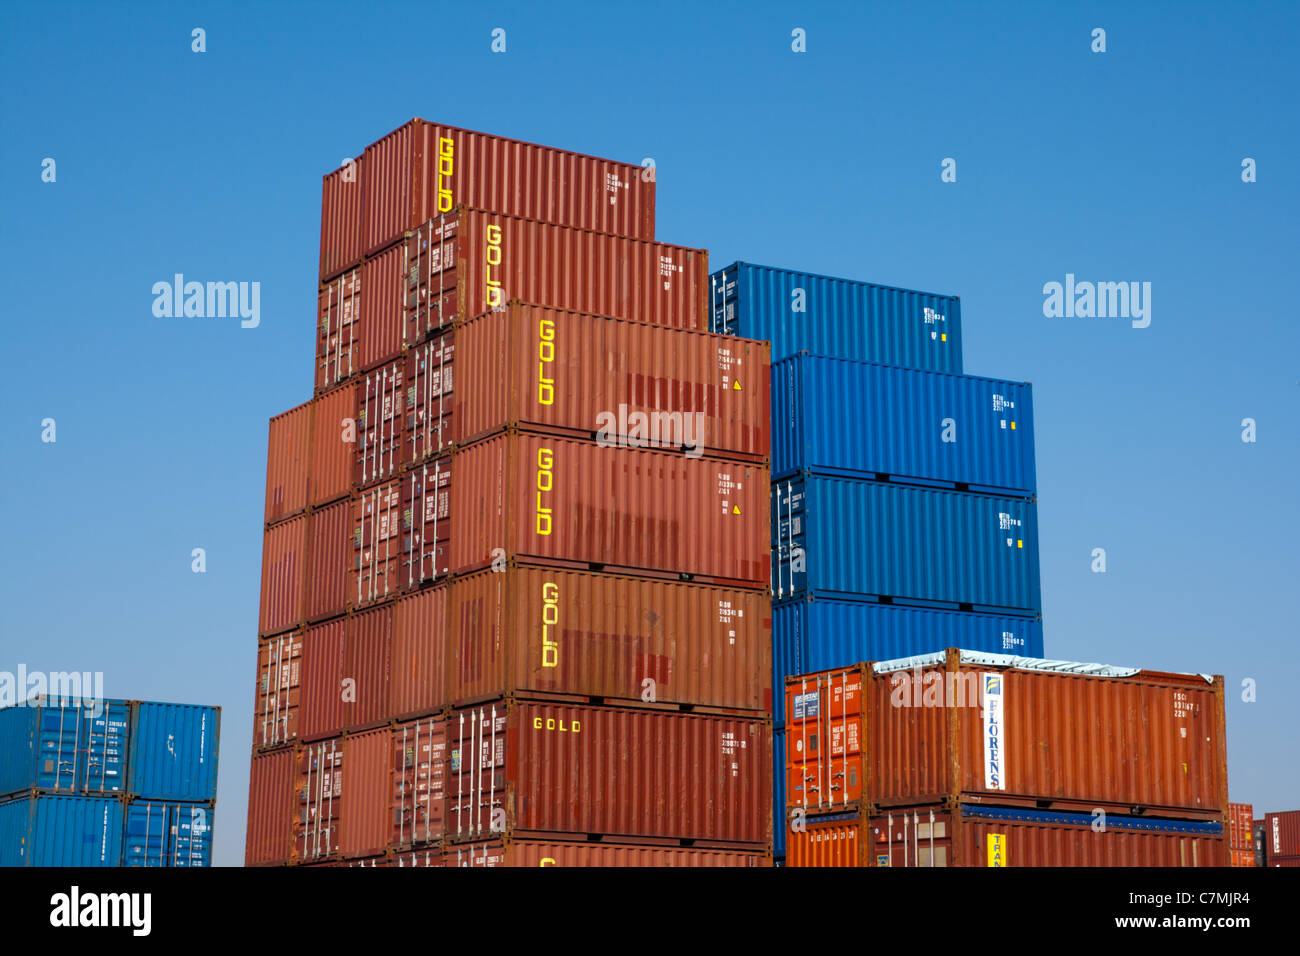 Stack of freight containers at the docks Stock Photo